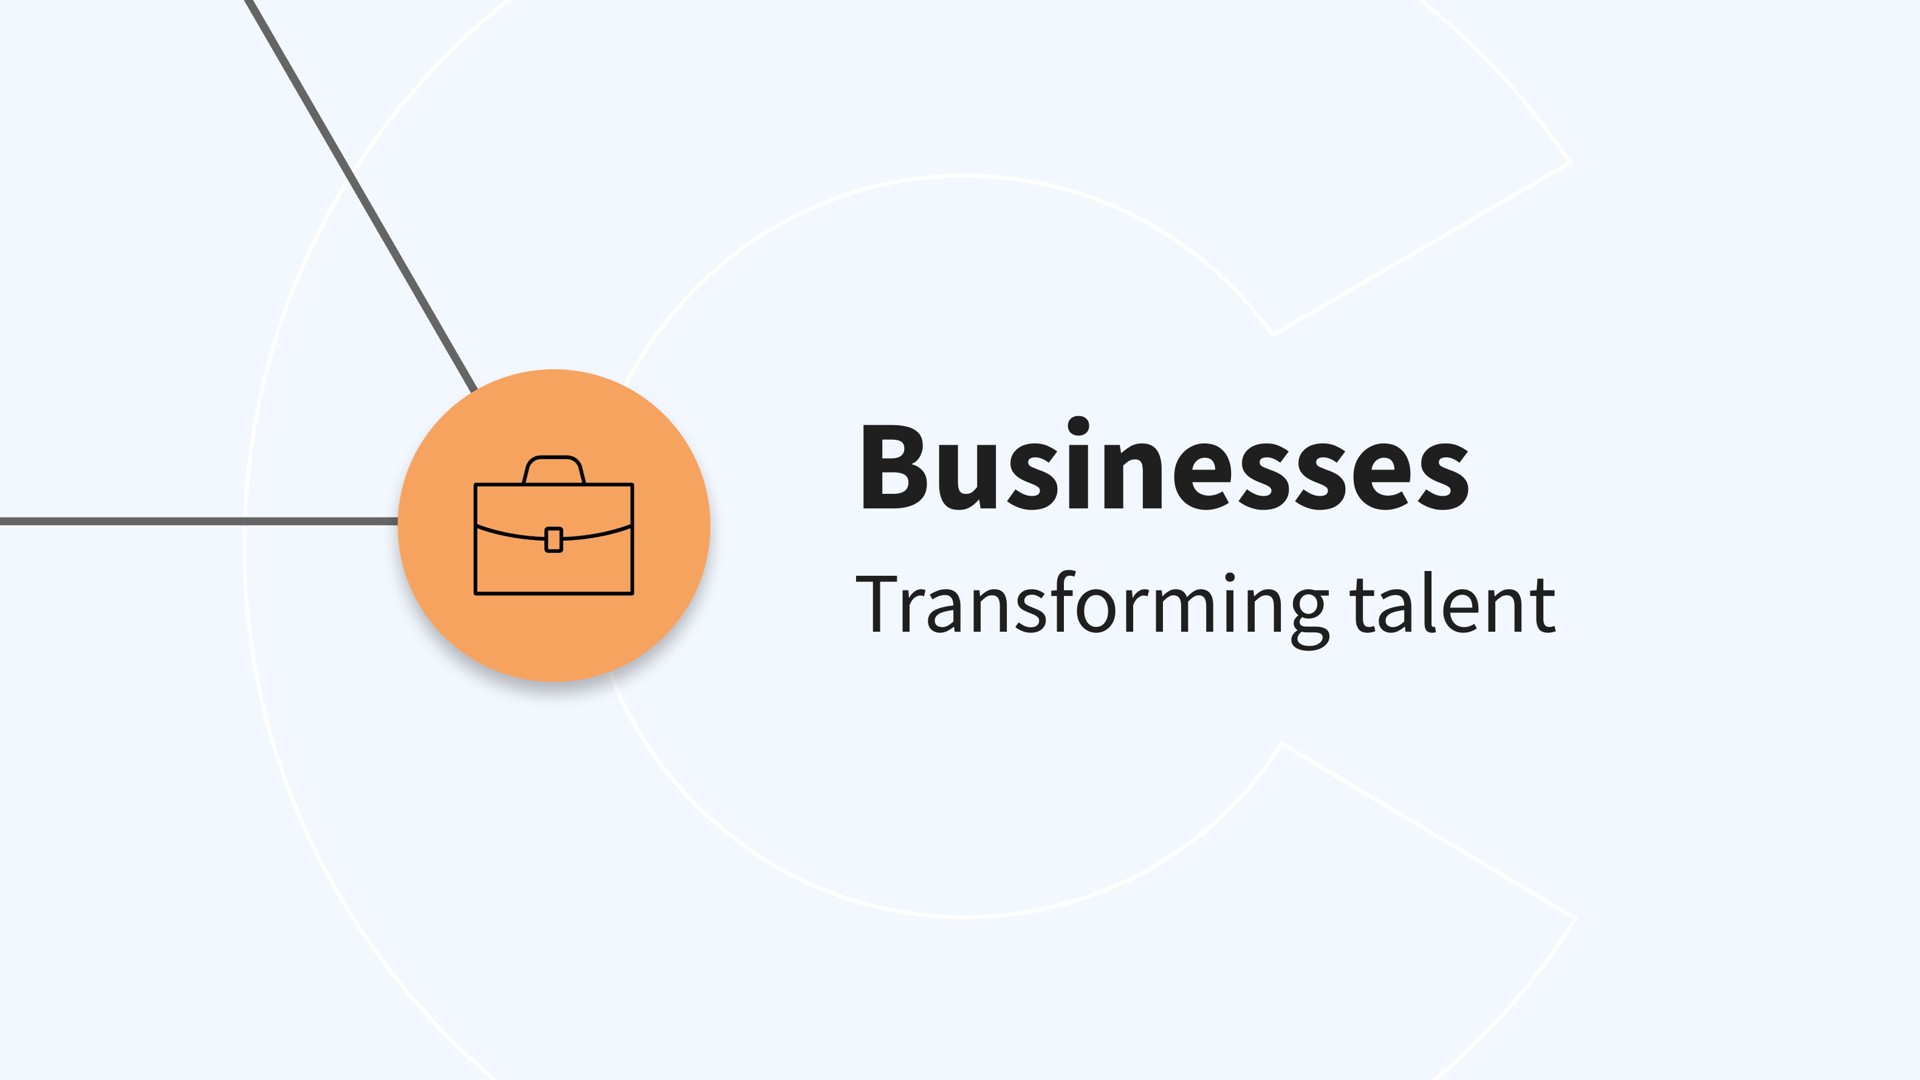 businesses transforming talent | Coursera